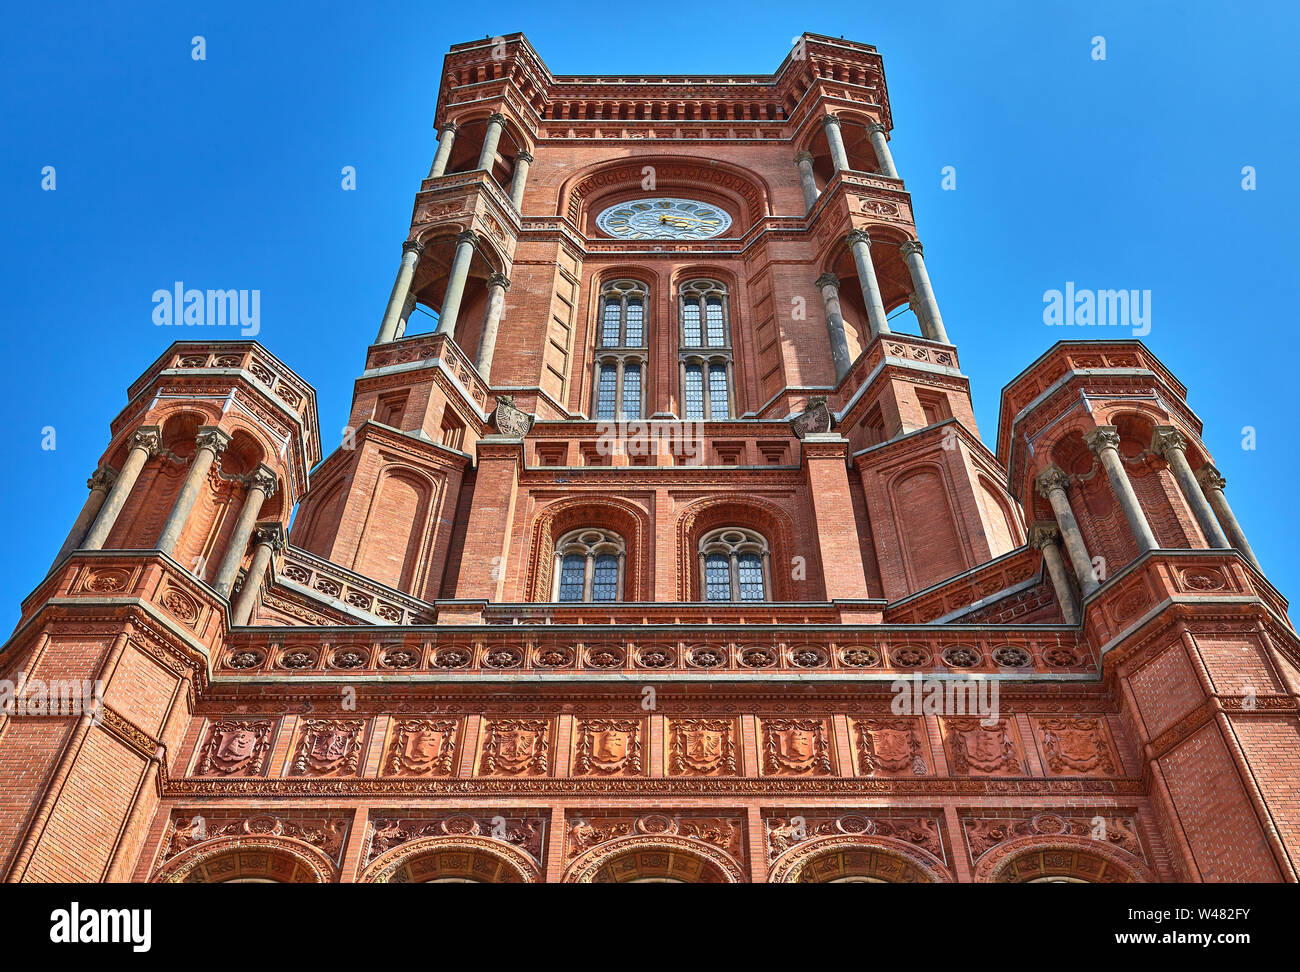 The Rotes Rathaus is the town hall of Berlin, in the Mitte district on Rathausstraße near Alexanderplatz. It is the home to the governing mayor. Stock Photo